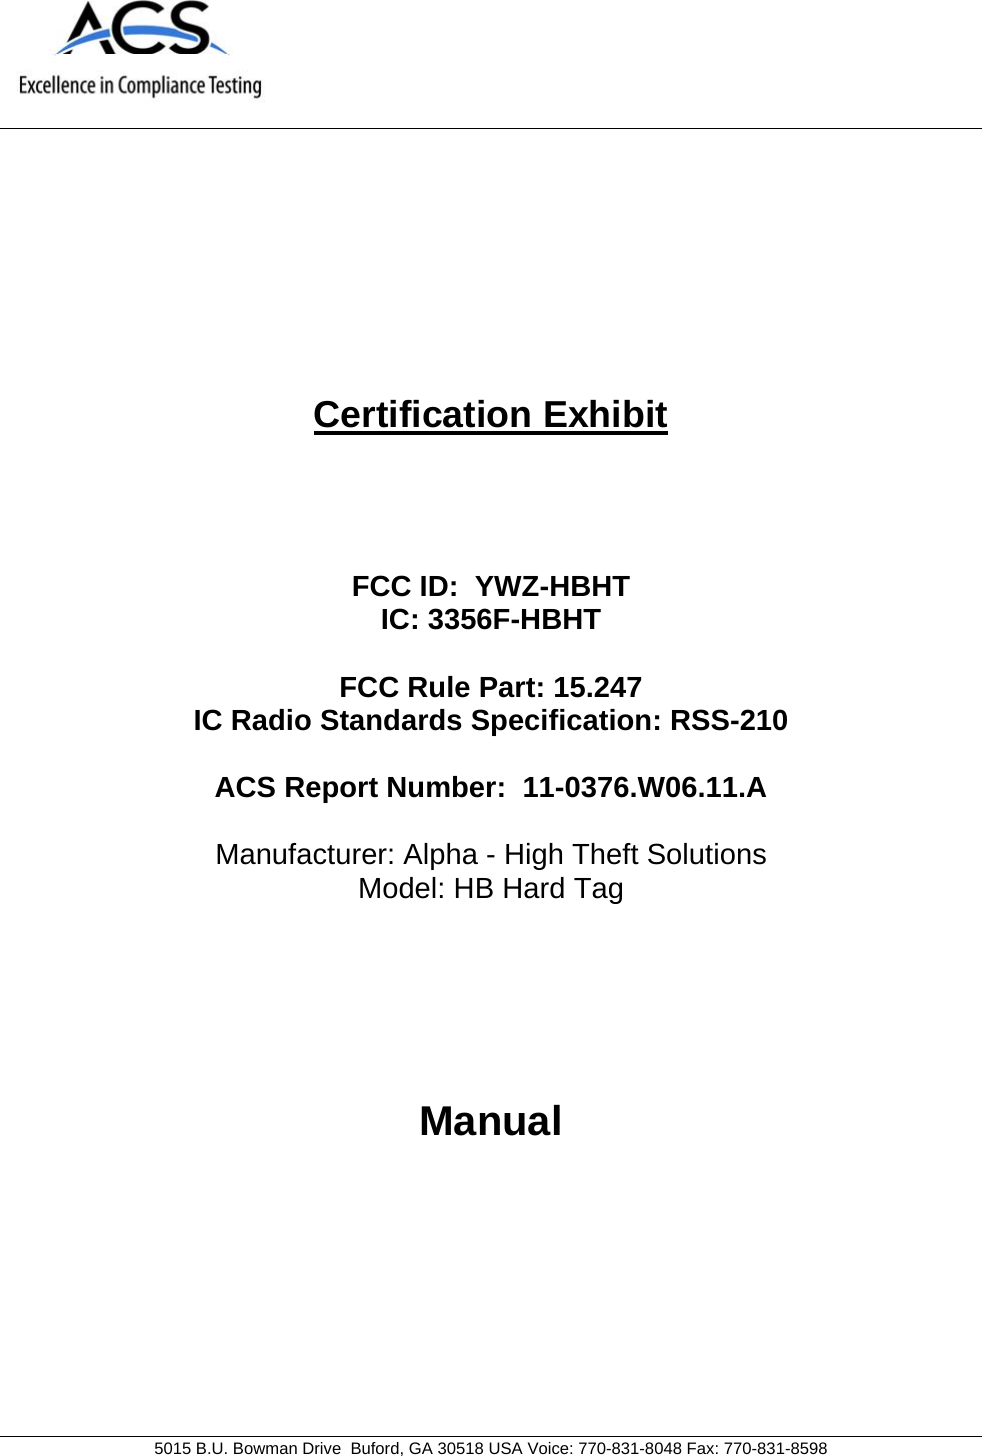     5015 B.U. Bowman Drive  Buford, GA 30518 USA Voice: 770-831-8048 Fax: 770-831-8598   Certification Exhibit     FCC ID:  YWZ-HBHT IC: 3356F-HBHT  FCC Rule Part: 15.247 IC Radio Standards Specification: RSS-210  ACS Report Number:  11-0376.W06.11.A   Manufacturer: Alpha - High Theft Solutions Model: HB Hard Tag     Manual  